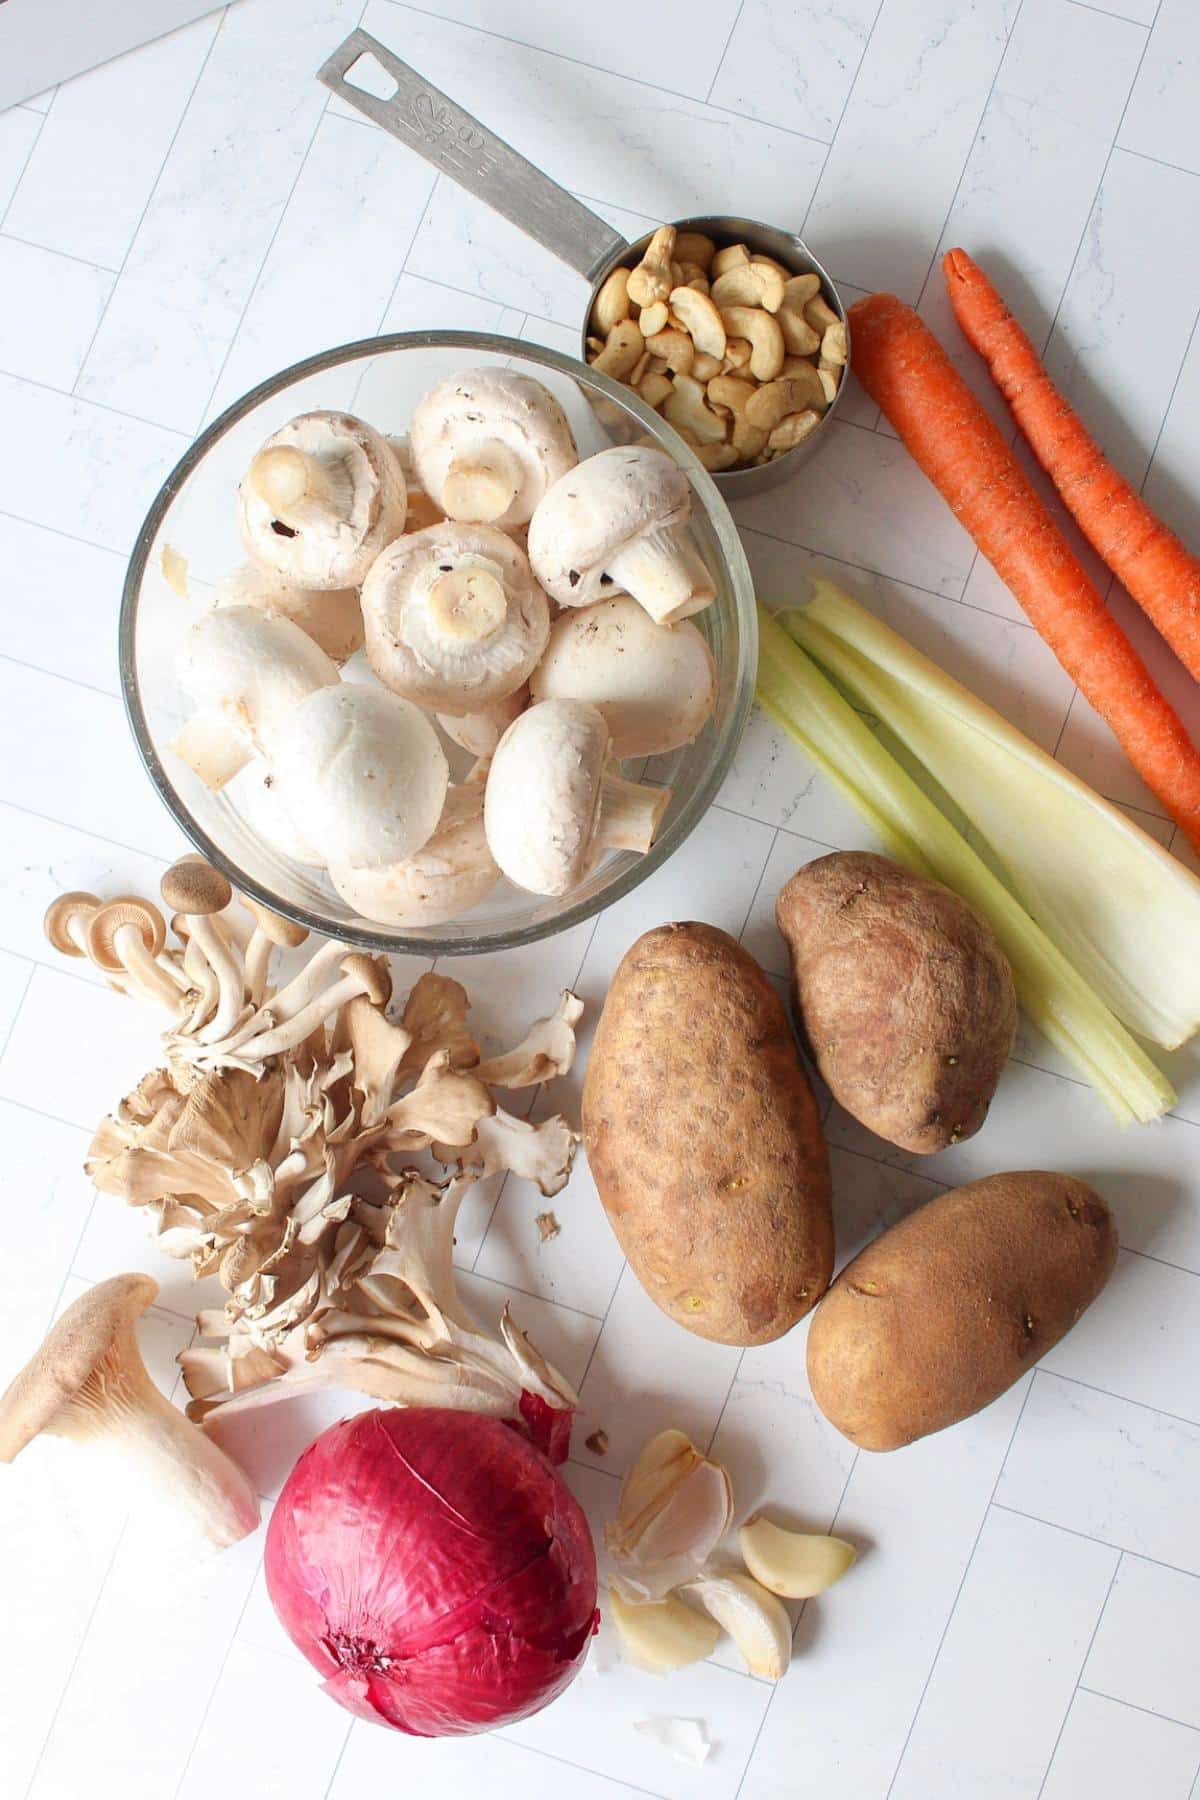 Vegan clam chowder ingredients laid out on a table